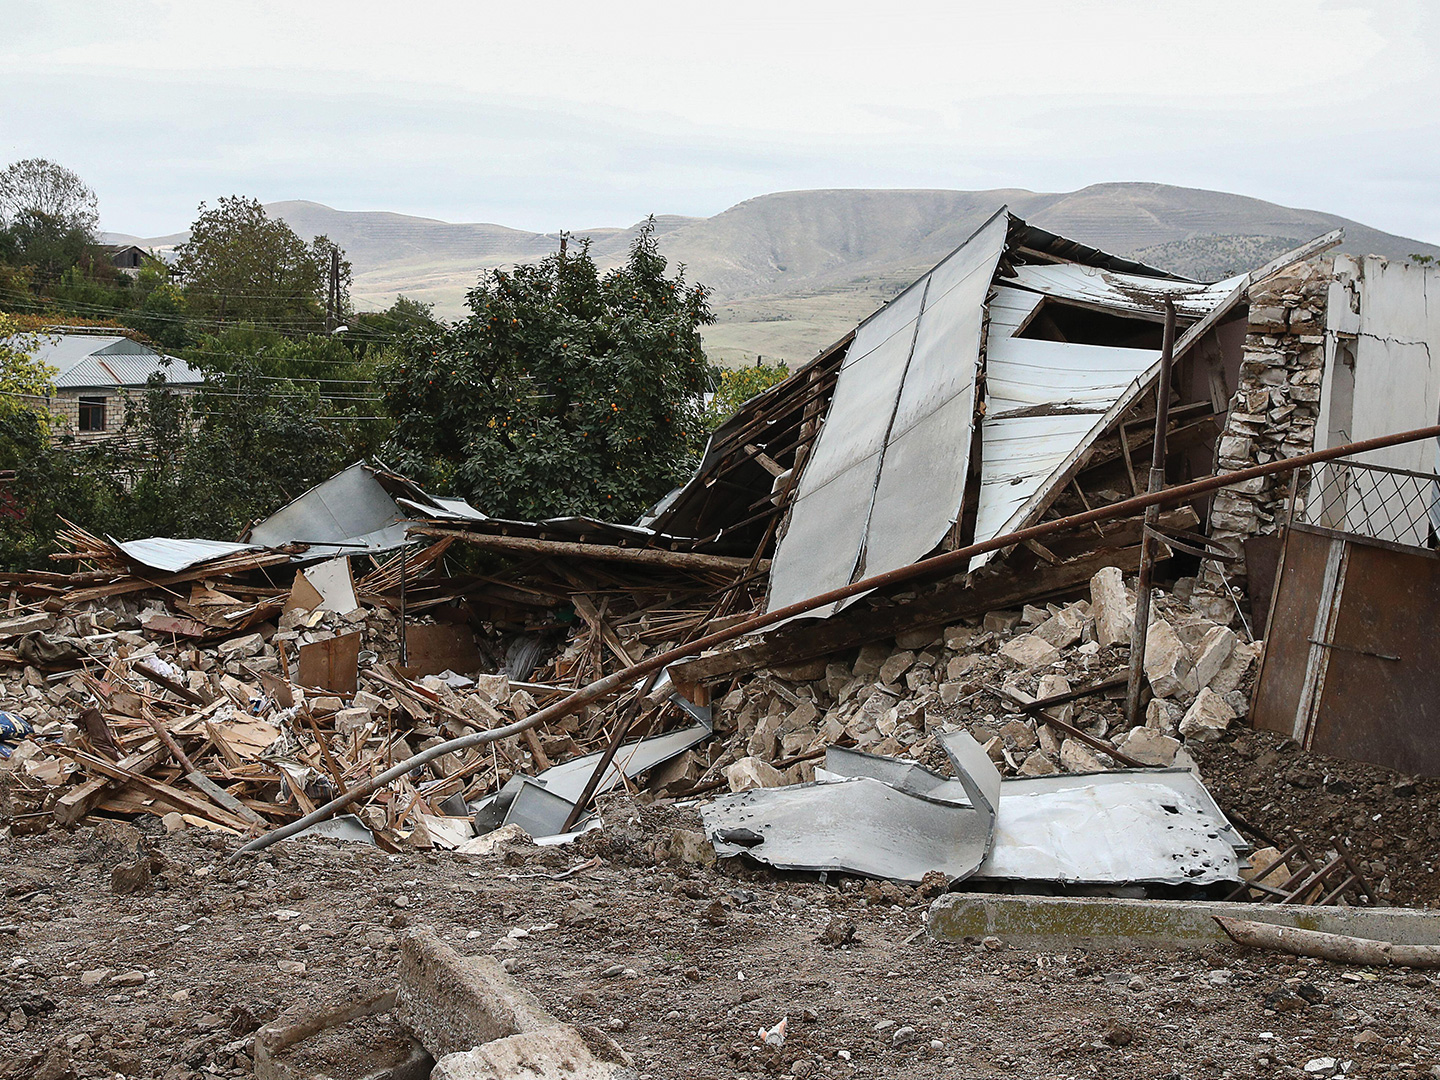 MARTUNI, NAGORNO-KARABAKH - OCTOBER 21, 2020: A house damaged by a military strike in the town of Martuni. The fighting between Armenia and Azerbaijan over the disputed Caucasus Mountains territory of Nagorno-Karabakh resumed in late September. 